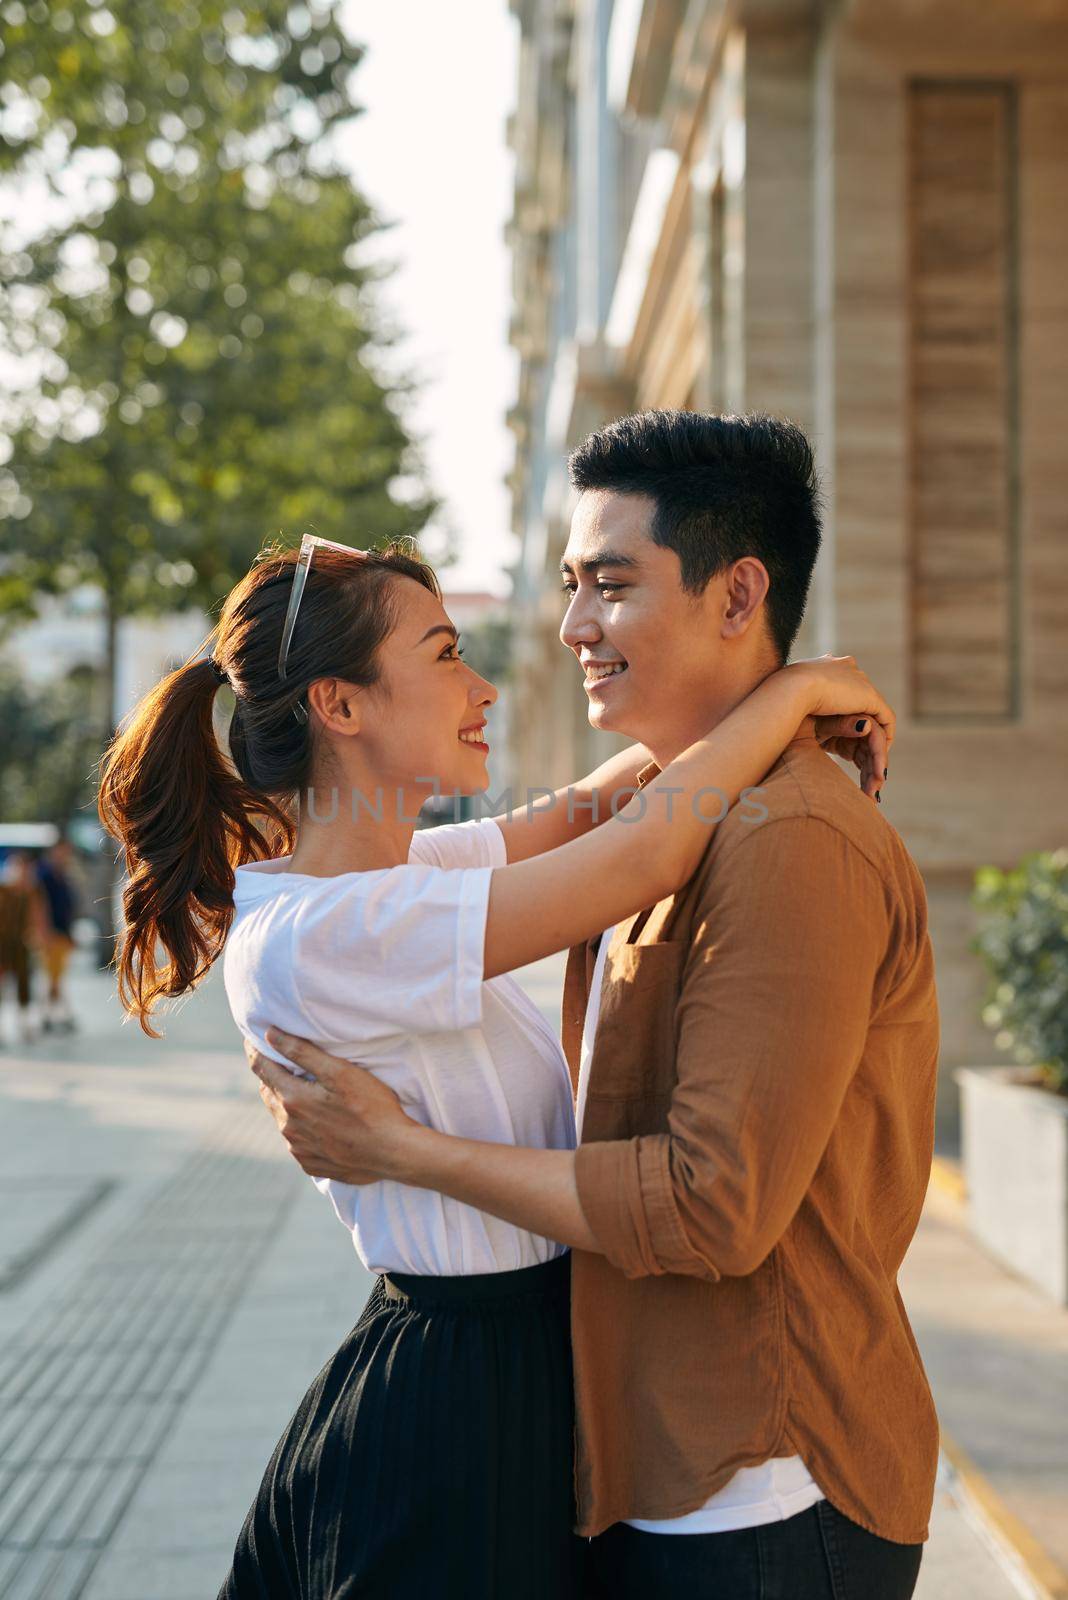 Rear view of a young couple hugging in a destination city while standing in the shopping district near a luxury quality shoe store, outdoors by makidotvn